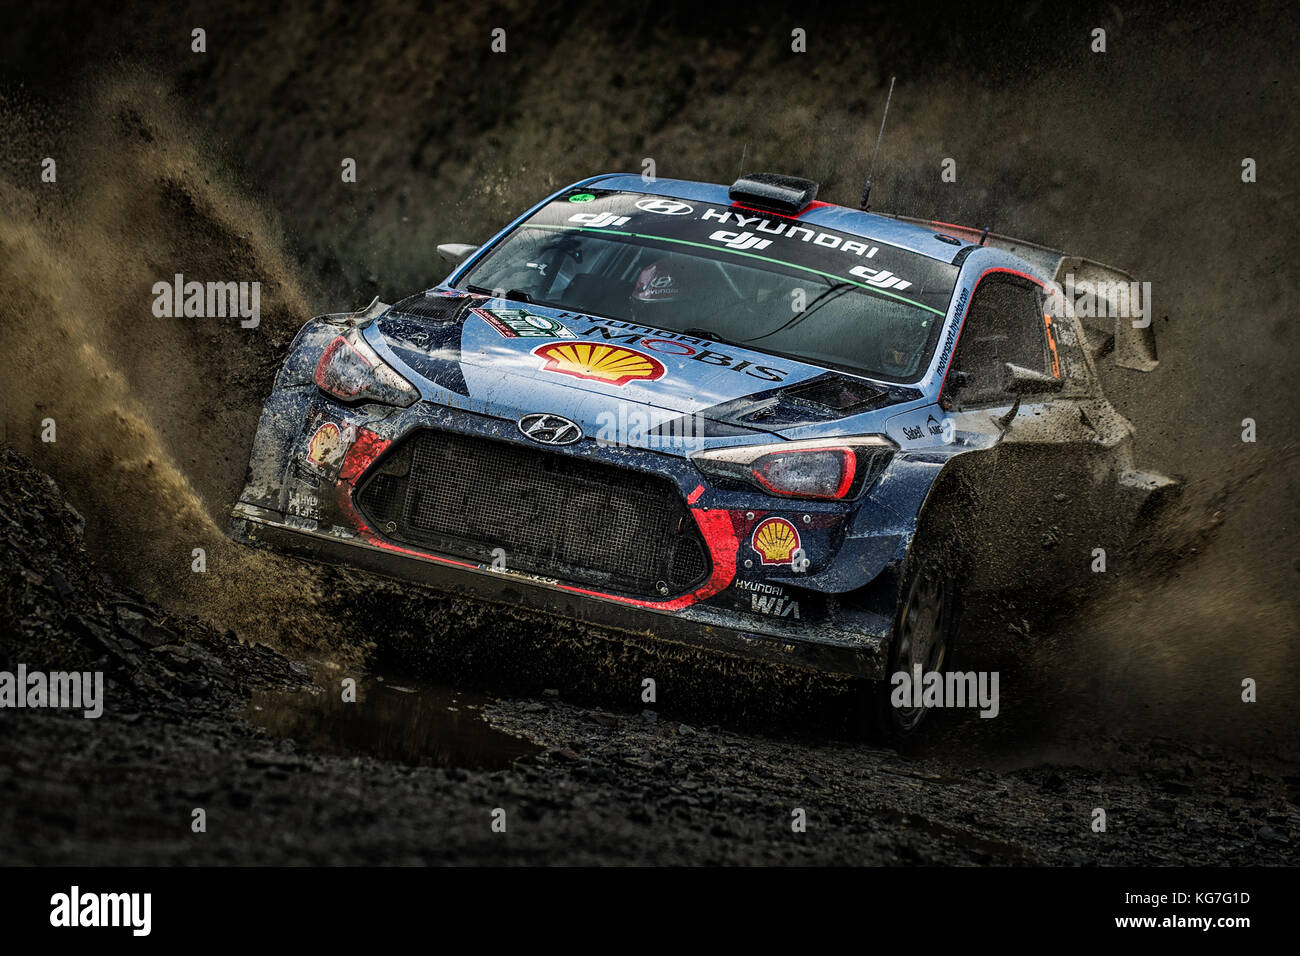 Thierry Neuville dans le rallye WRC World Rally Championship jour assurer Wales Rally GB 2017 Banque D'Images